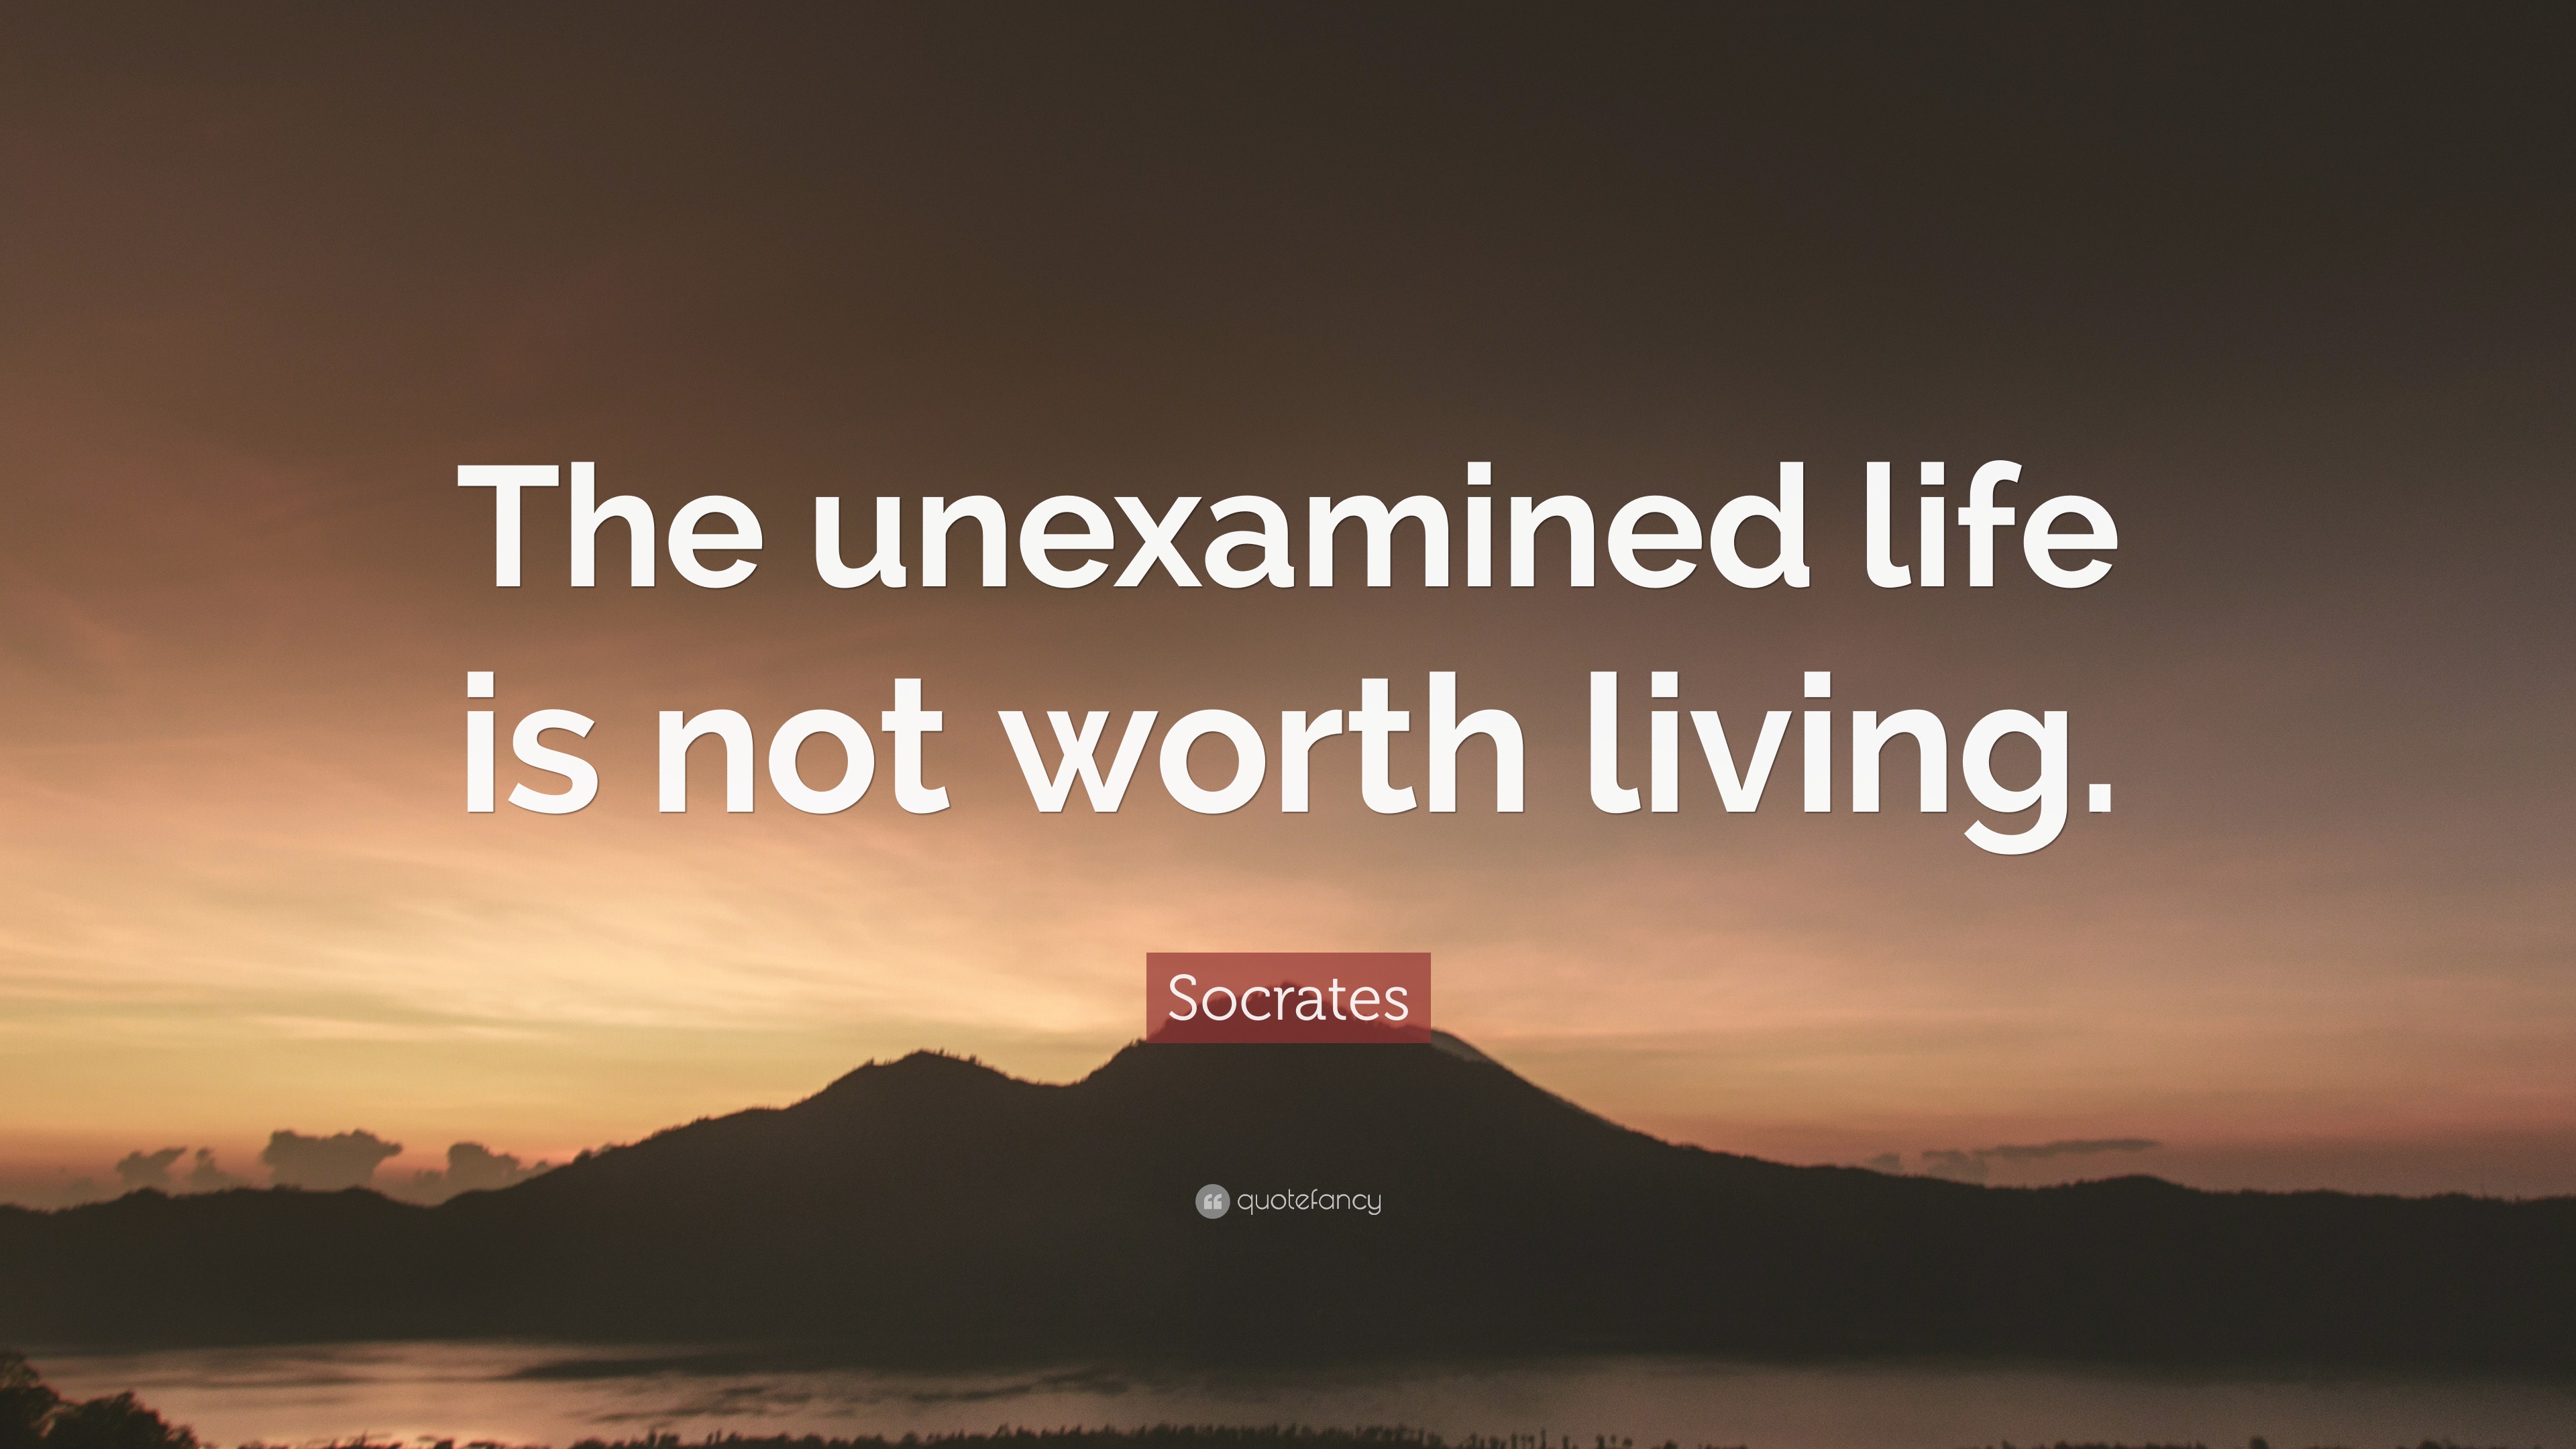 Socrates Quote: “The unexamined life is not worth living.” (20